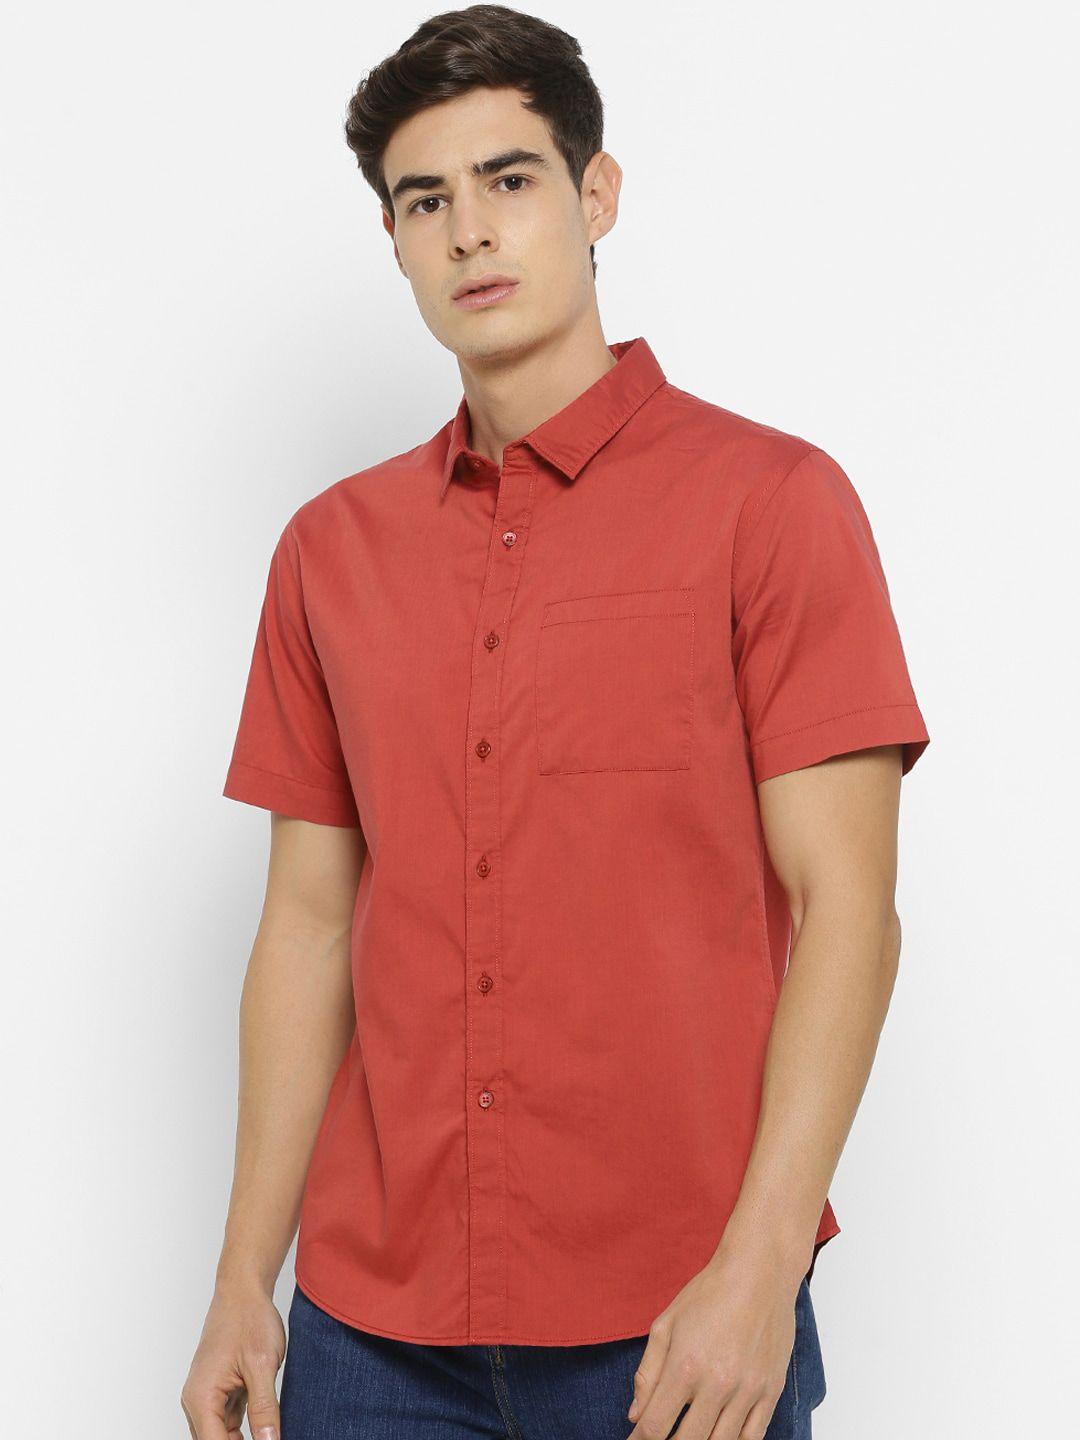 forever-21-men-red-slim-fit-solid-casual-shirt